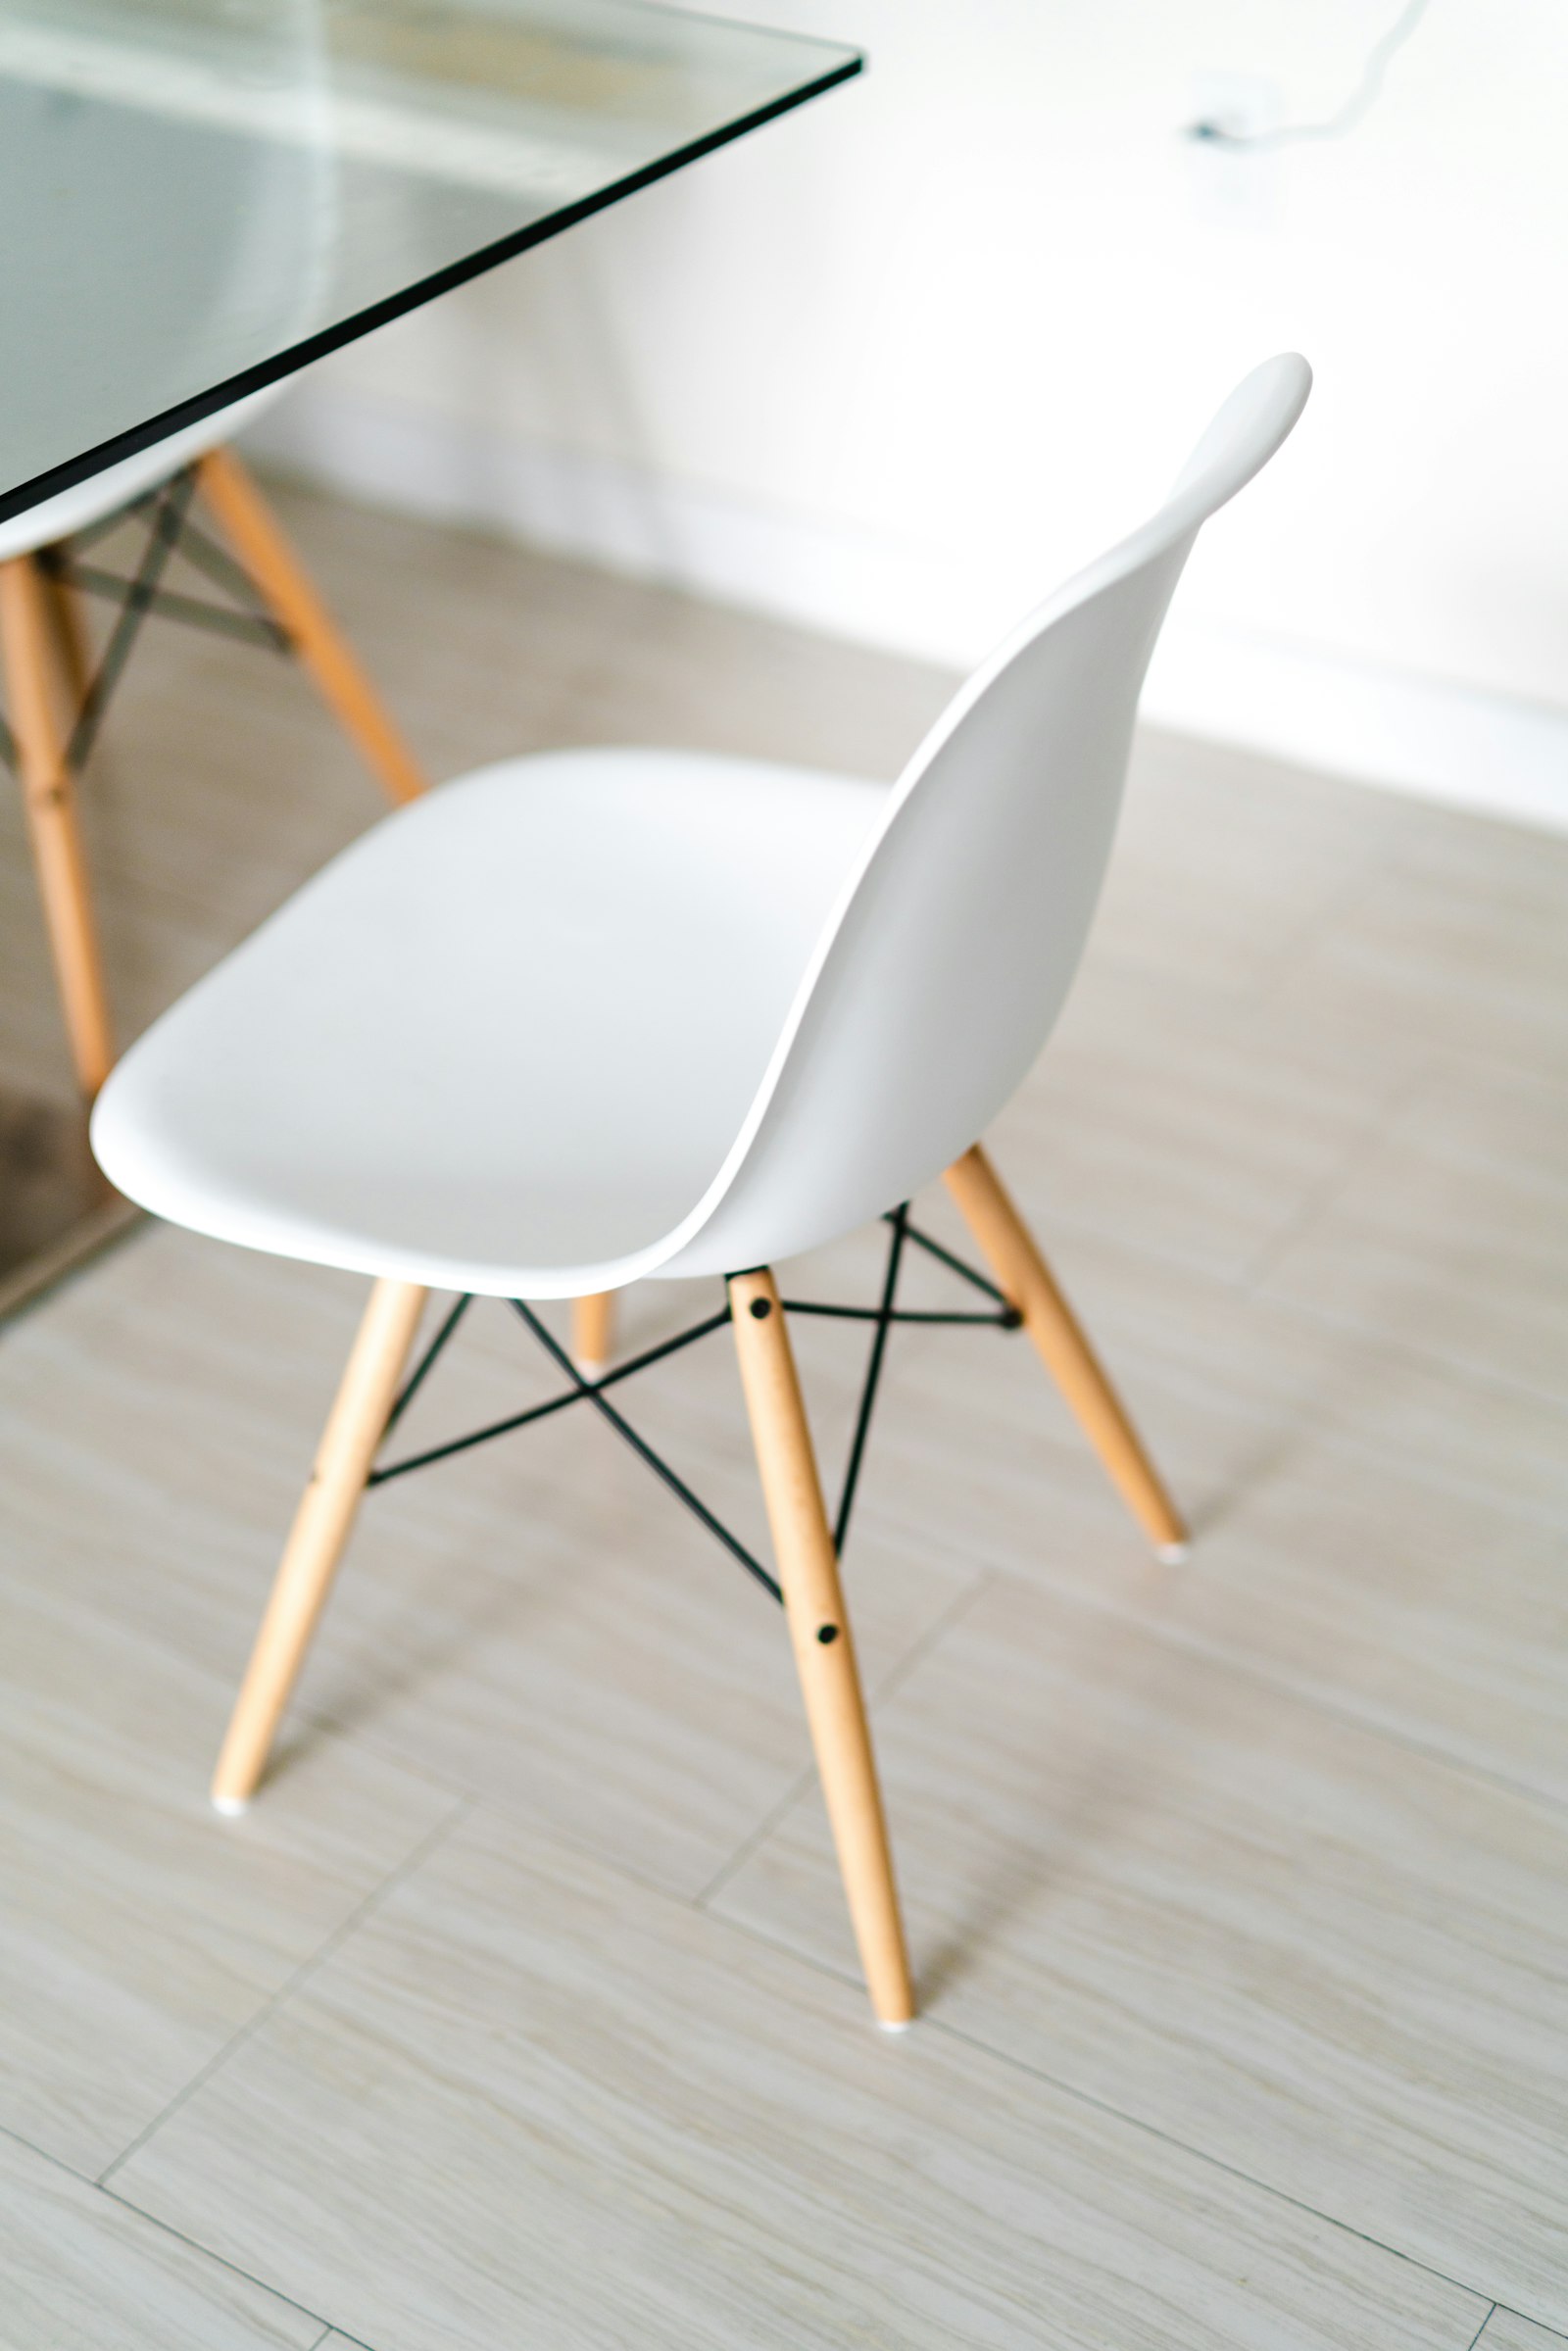 Samyang AF 50mm F1.4 FE sample photo. White dining chair photography